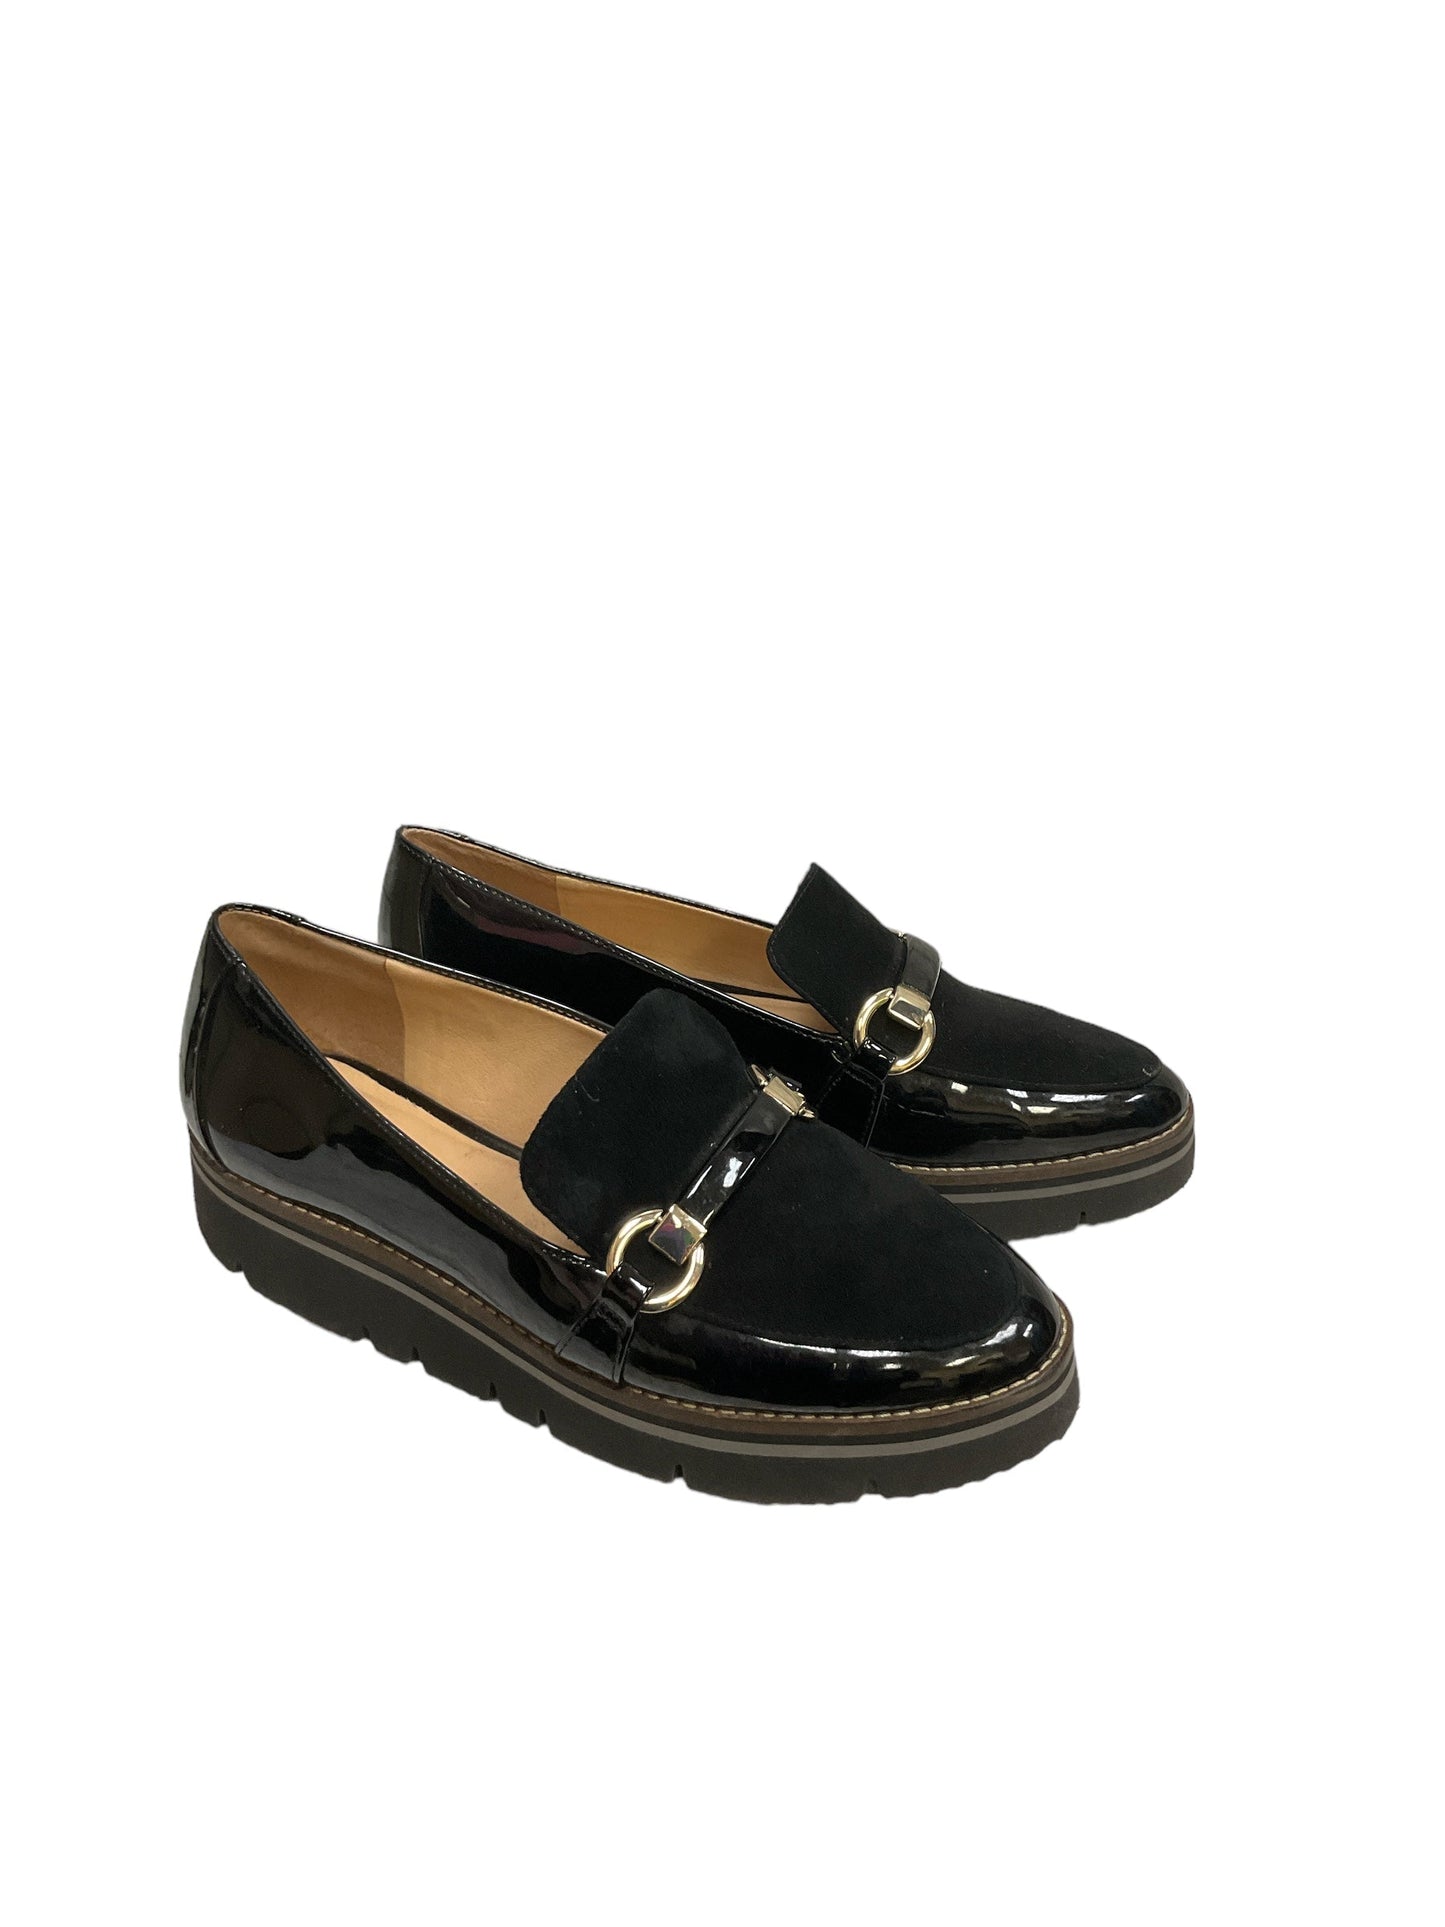 Shoes Flats Loafer Oxford By Alex Marie  Size: 7